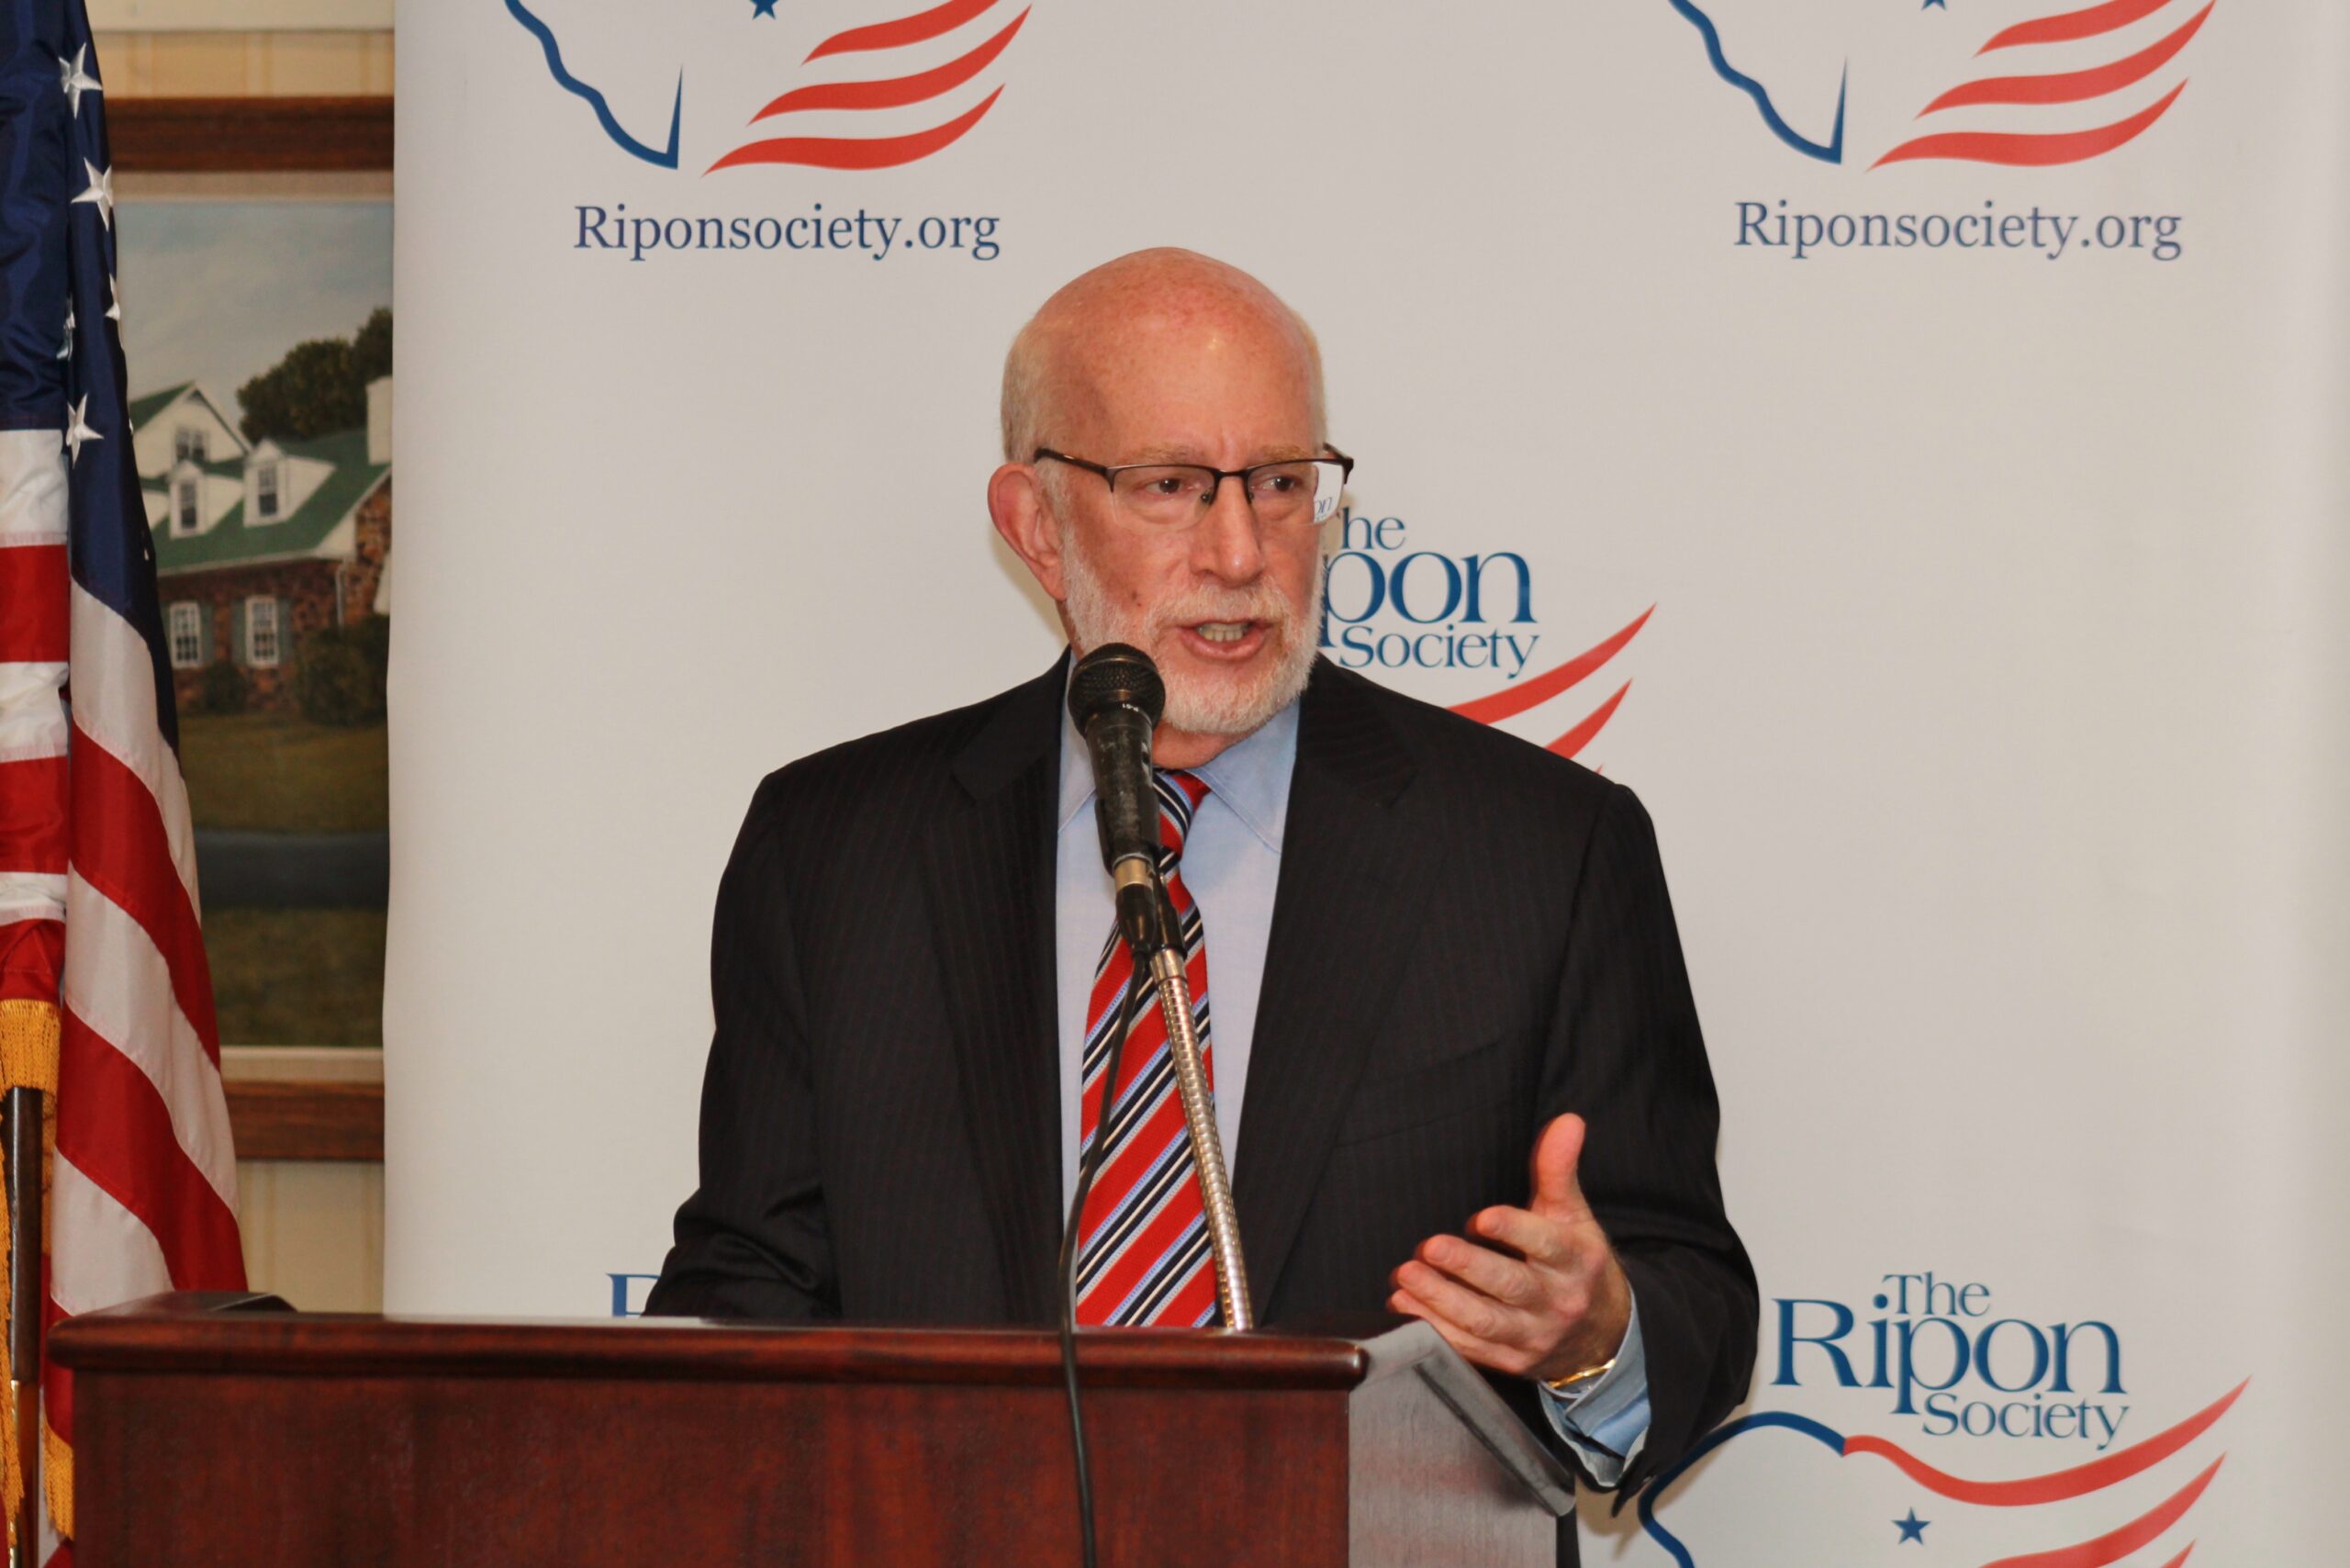 Ripon Society Holds Election Briefing with Veteran Attorney & Strategist Ben Ginsberg